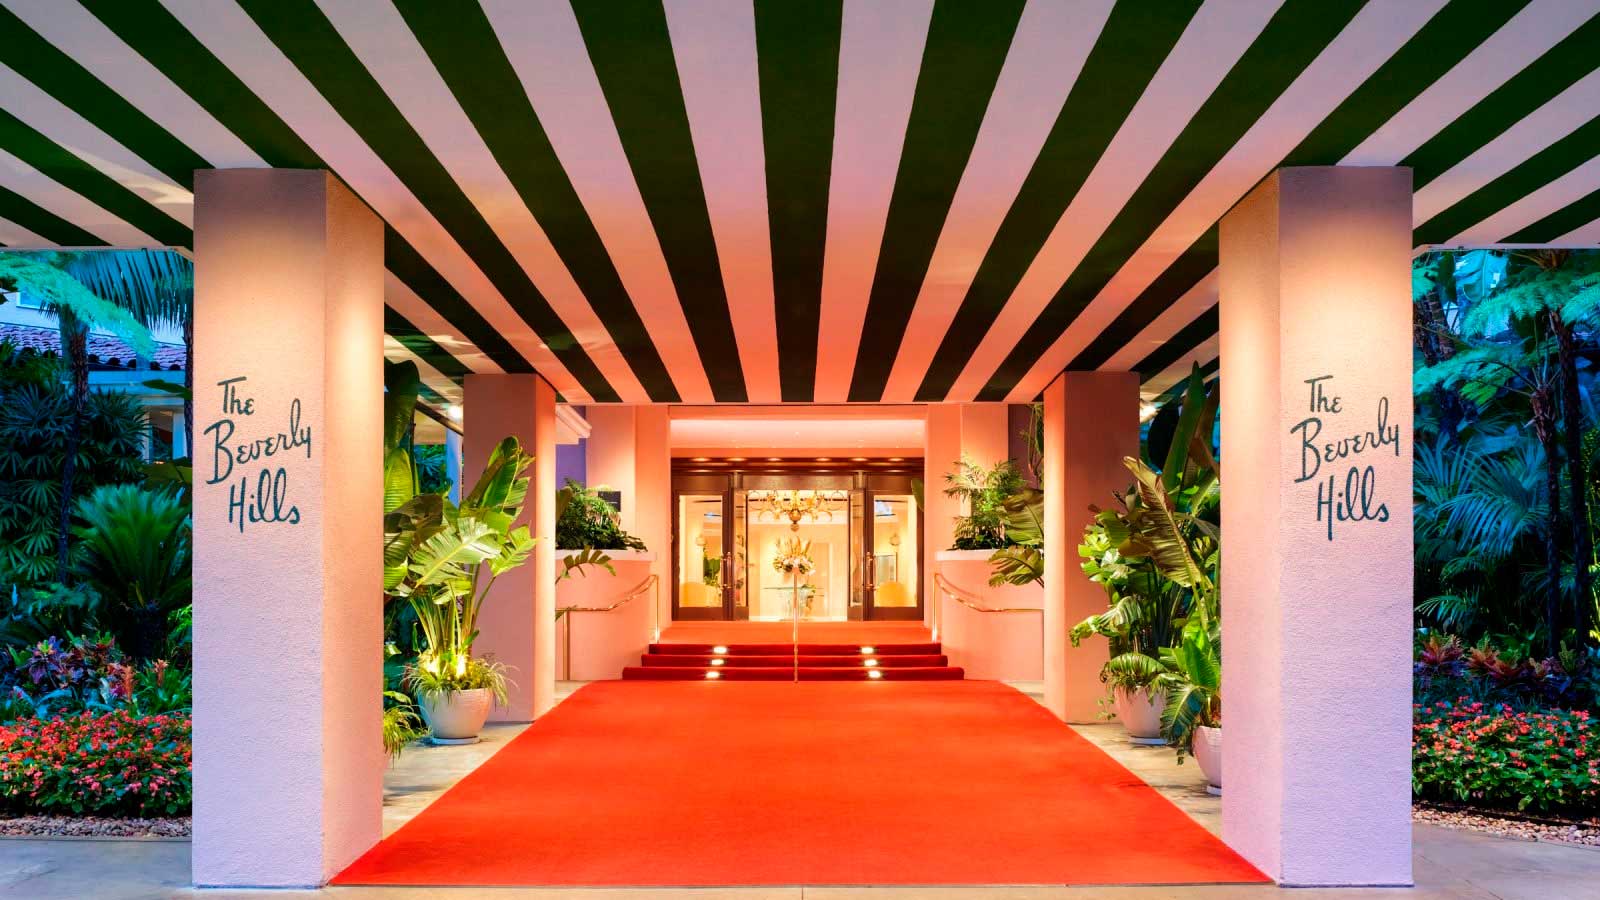 The Beverly Hill Hotel entrance with red carpet